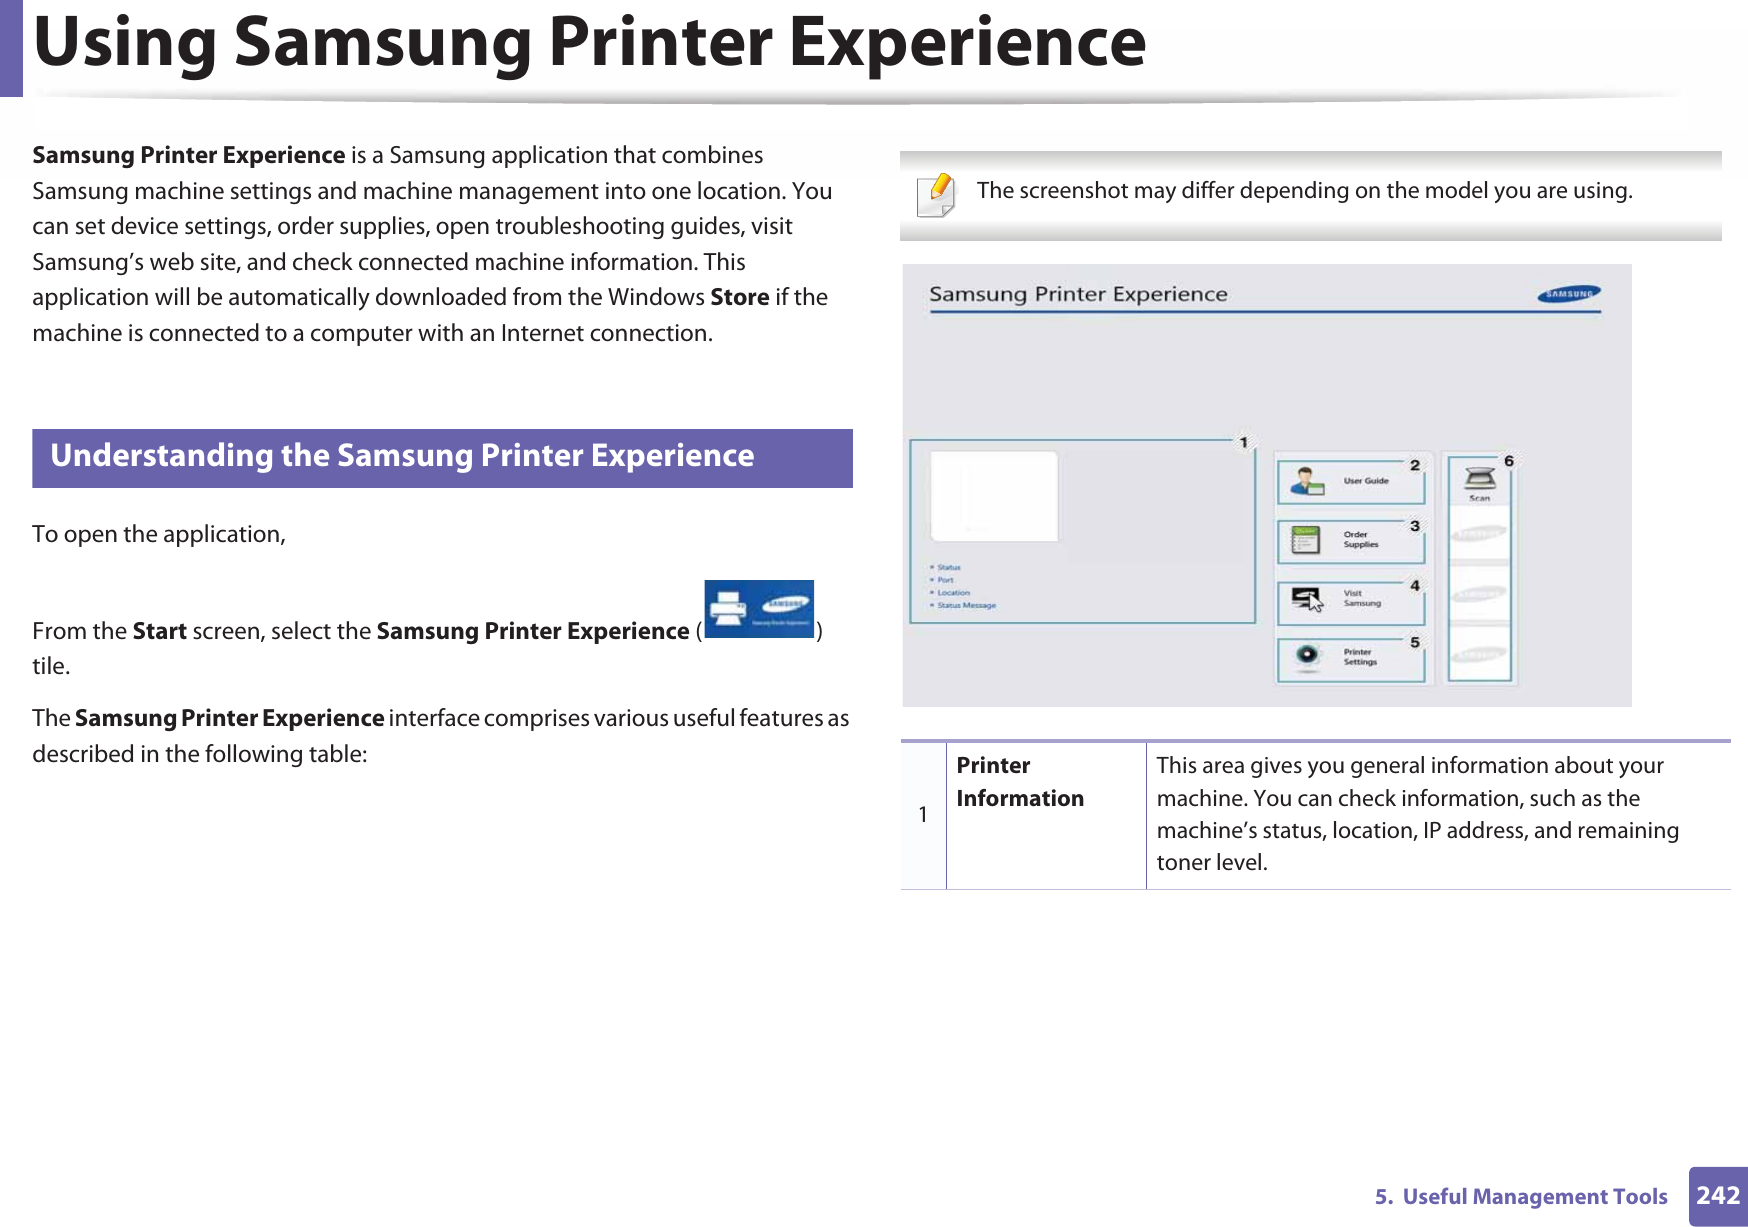 2425.  Useful Management ToolsUsing Samsung Printer Experience Samsung Printer Experience is a Samsung application that combines Samsung machine settings and machine management into one location. You can set device settings, order supplies, open troubleshooting guides, visit Samsung’s web site, and check connected machine information. This application will be automatically downloaded from the Windows Store if the machine is connected to a computer with an Internet connection. 8 Understanding the Samsung Printer ExperienceTo open the application, From the Start screen, select the Samsung Printer Experience ()Gtile. The Samsung Printer Experience interface comprises various useful features as described in the following table: The screenshot may differ depending on the model you are using. 1Printer InformationThis area gives you general information about your machine. You can check information, such as the machine’s status, location, IP address, and remaining toner level.